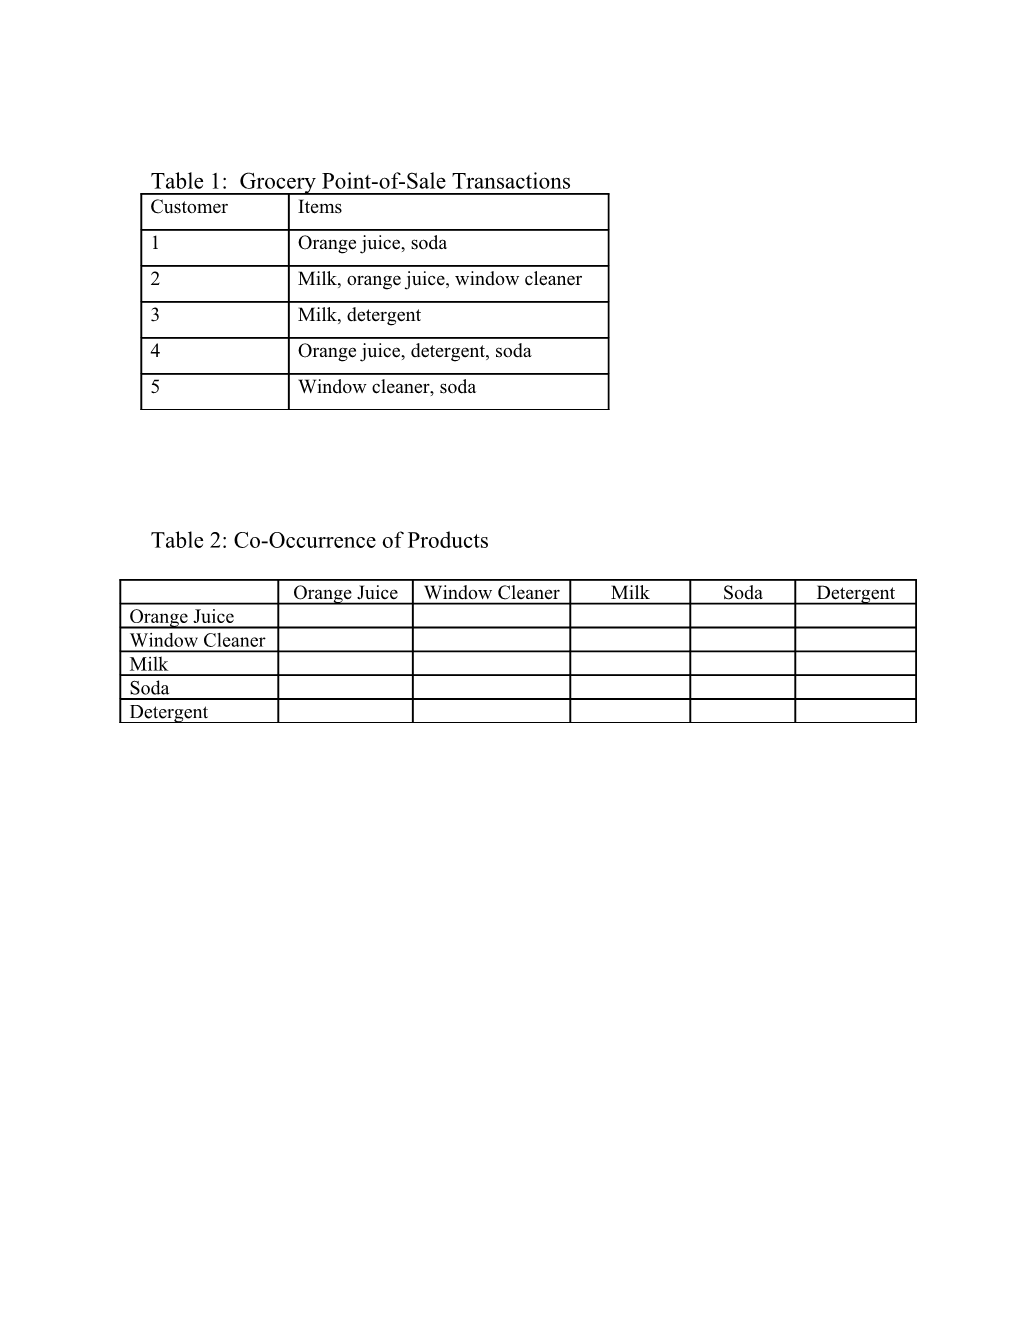 Table 1: Grocery Point-Of-Sale Transactions